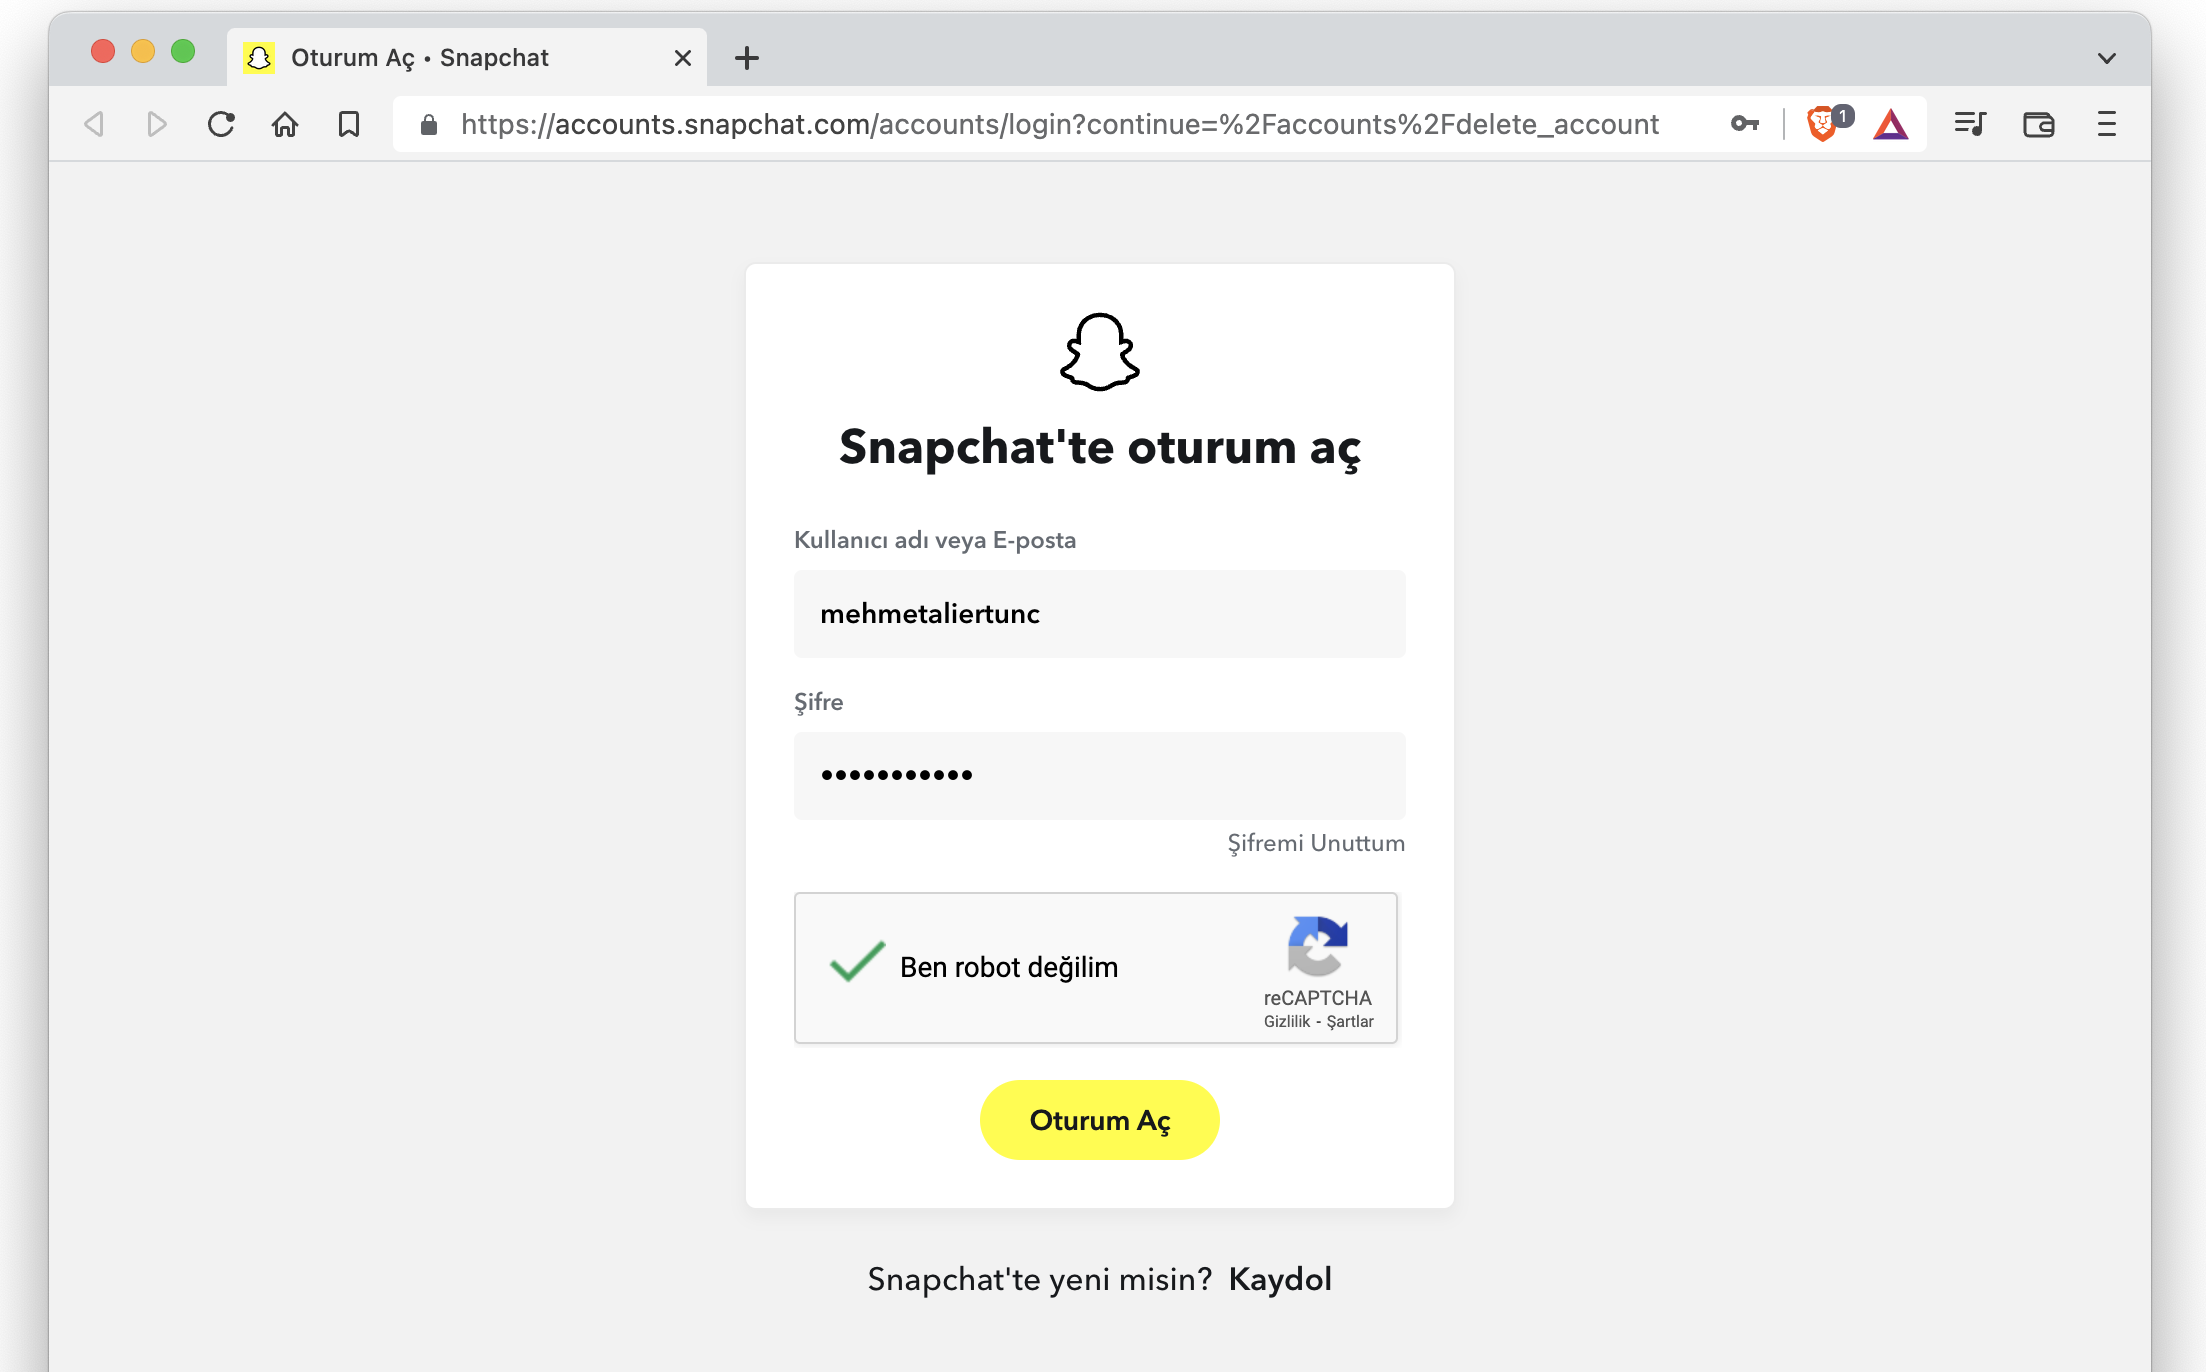 How to delete Snapchat account?